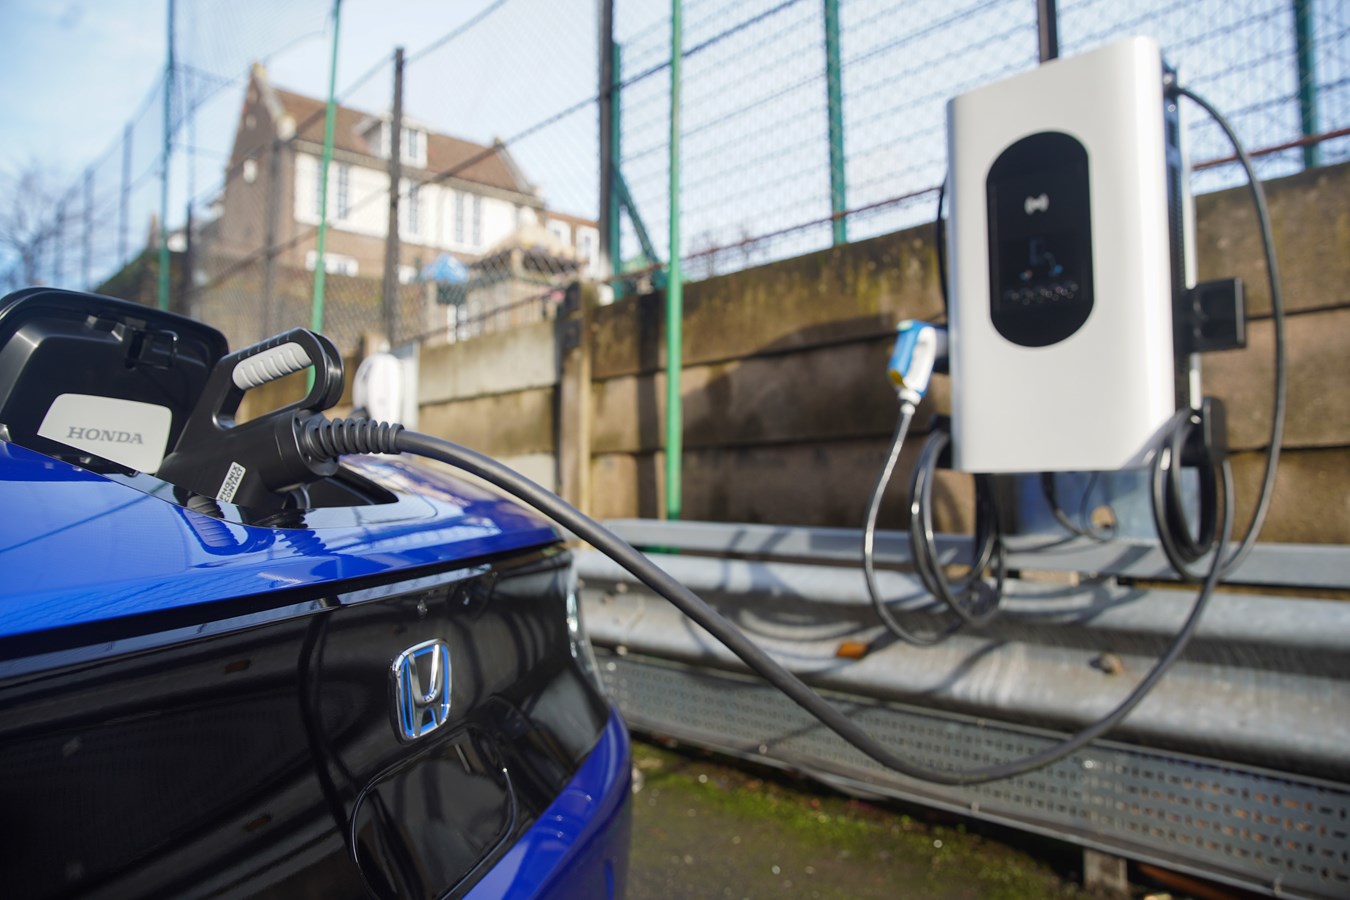 HONDA PARTNERS WITH MOIXA TO BRING V2G CHARGING PROJECT TO ISLINGTON